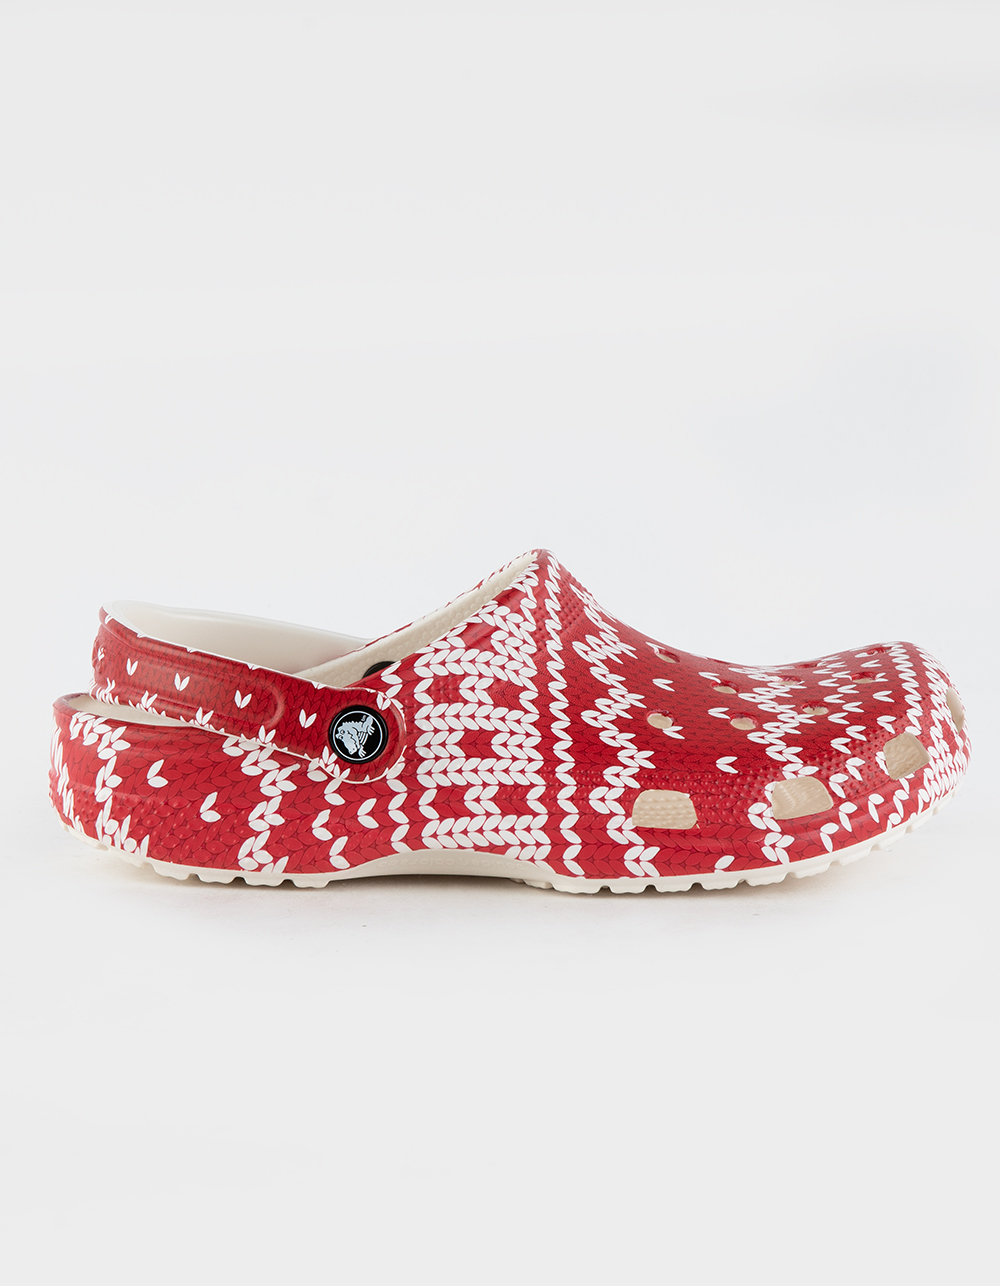 CROCS Classic Holiday Sweater Womens Clogs - RED COMBO | Tillys